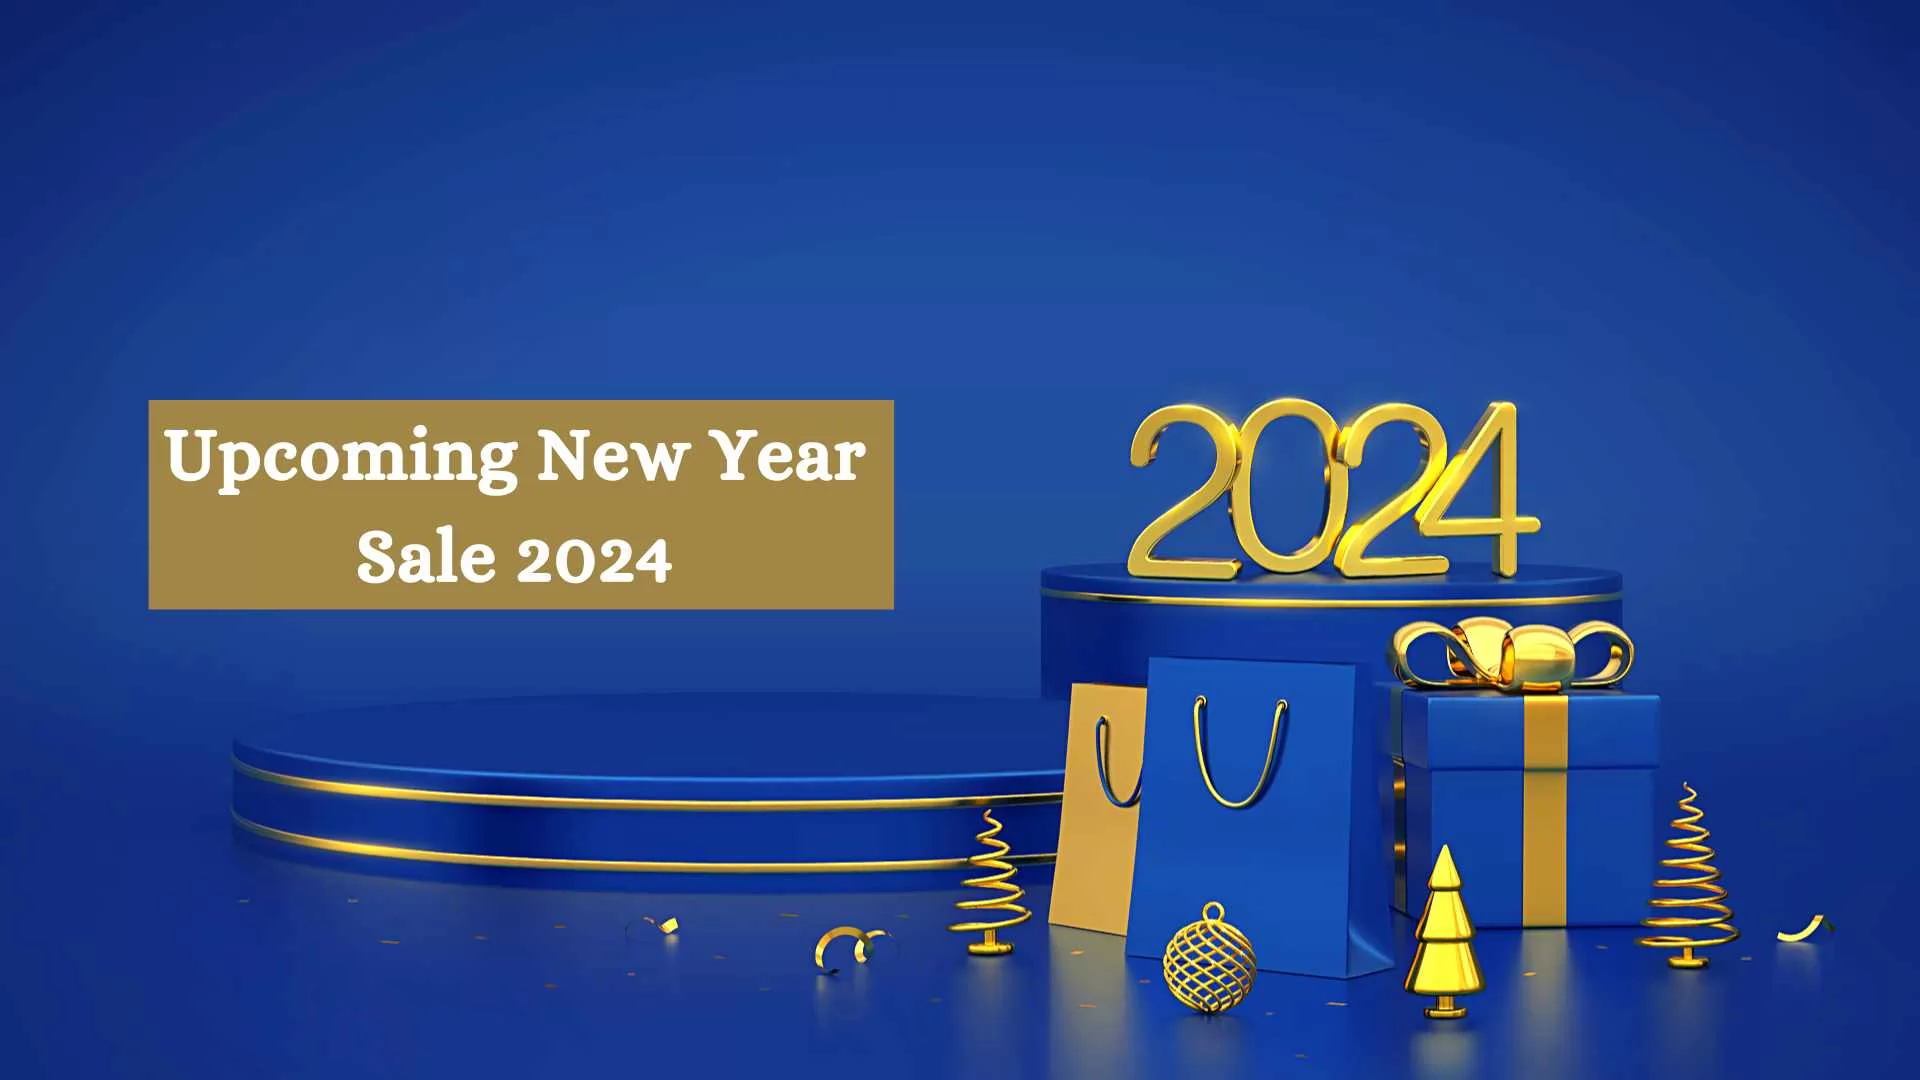 Upcoming New Year Sale 2024